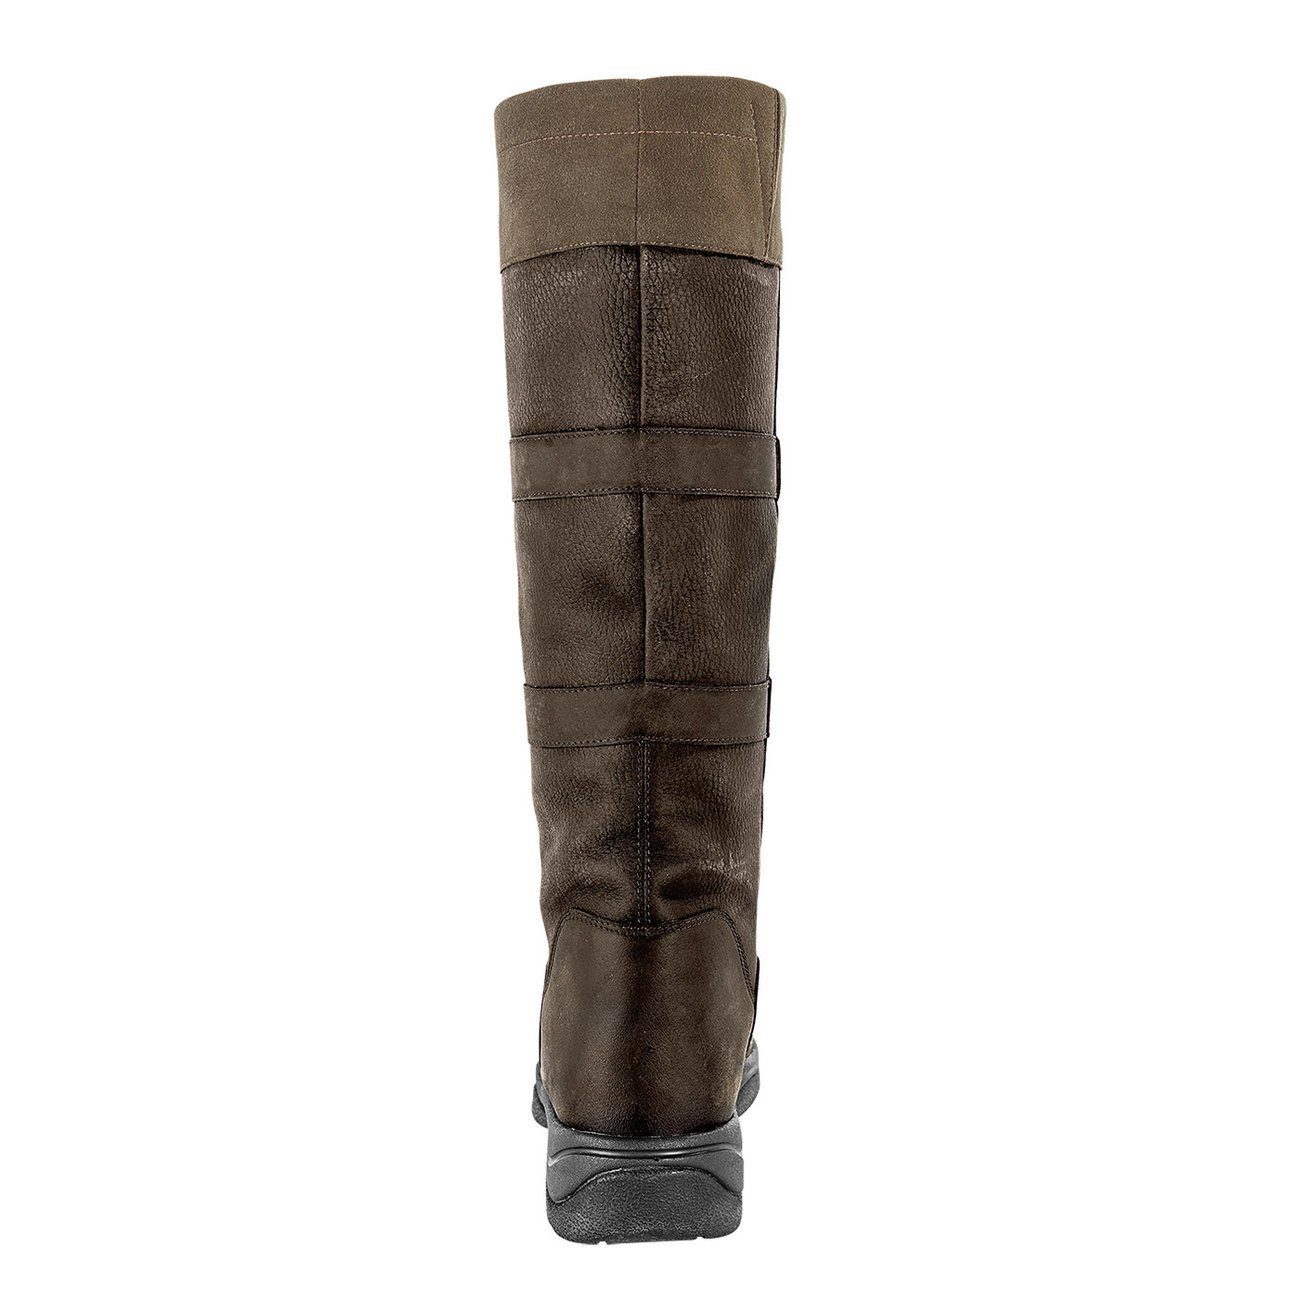 BUSSE Country Reitstiefel Stiefel